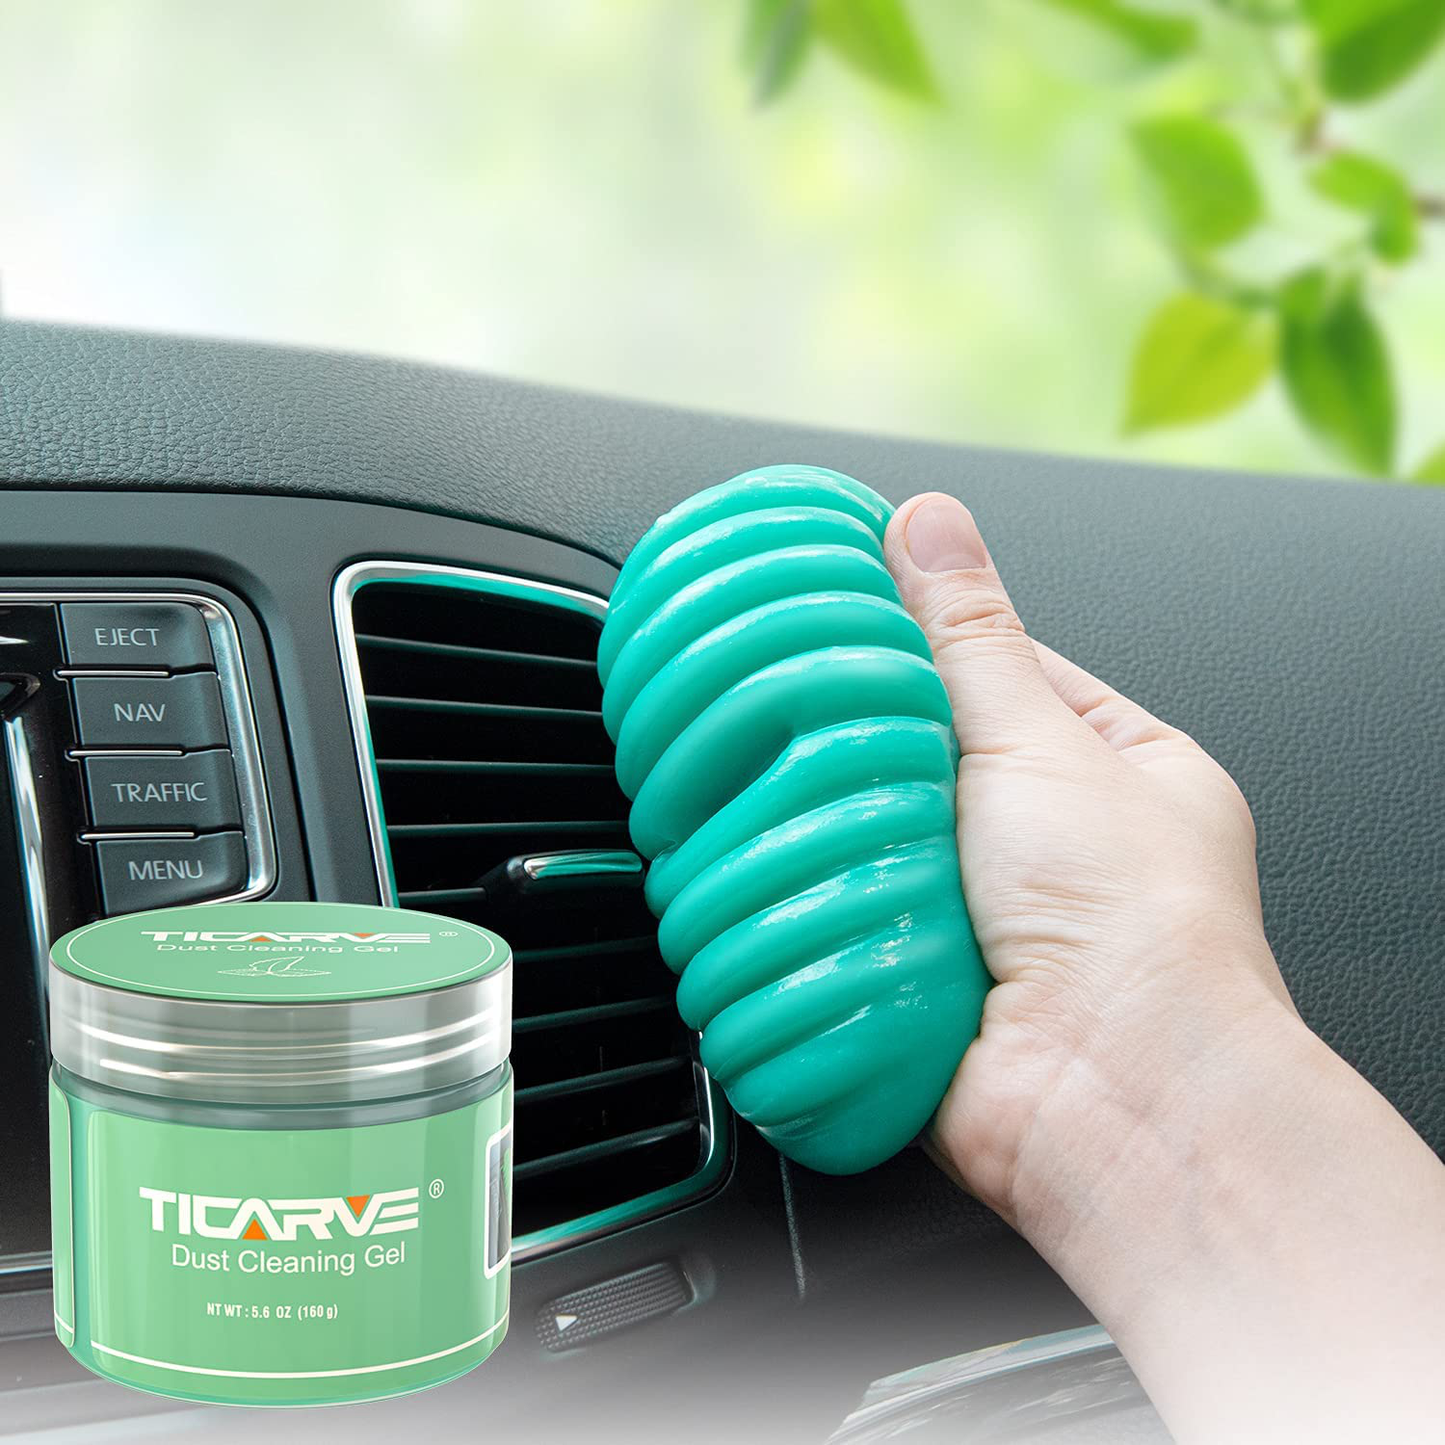 TICARVE Cleaning Gel for Car Detailing Putty Car Cleaning Putty Auto Detailing Gel Detail Tools for Car Interior Cleaner Car Cleaning Kit Car Vent Cleaner Automotive Car Cleaner Green